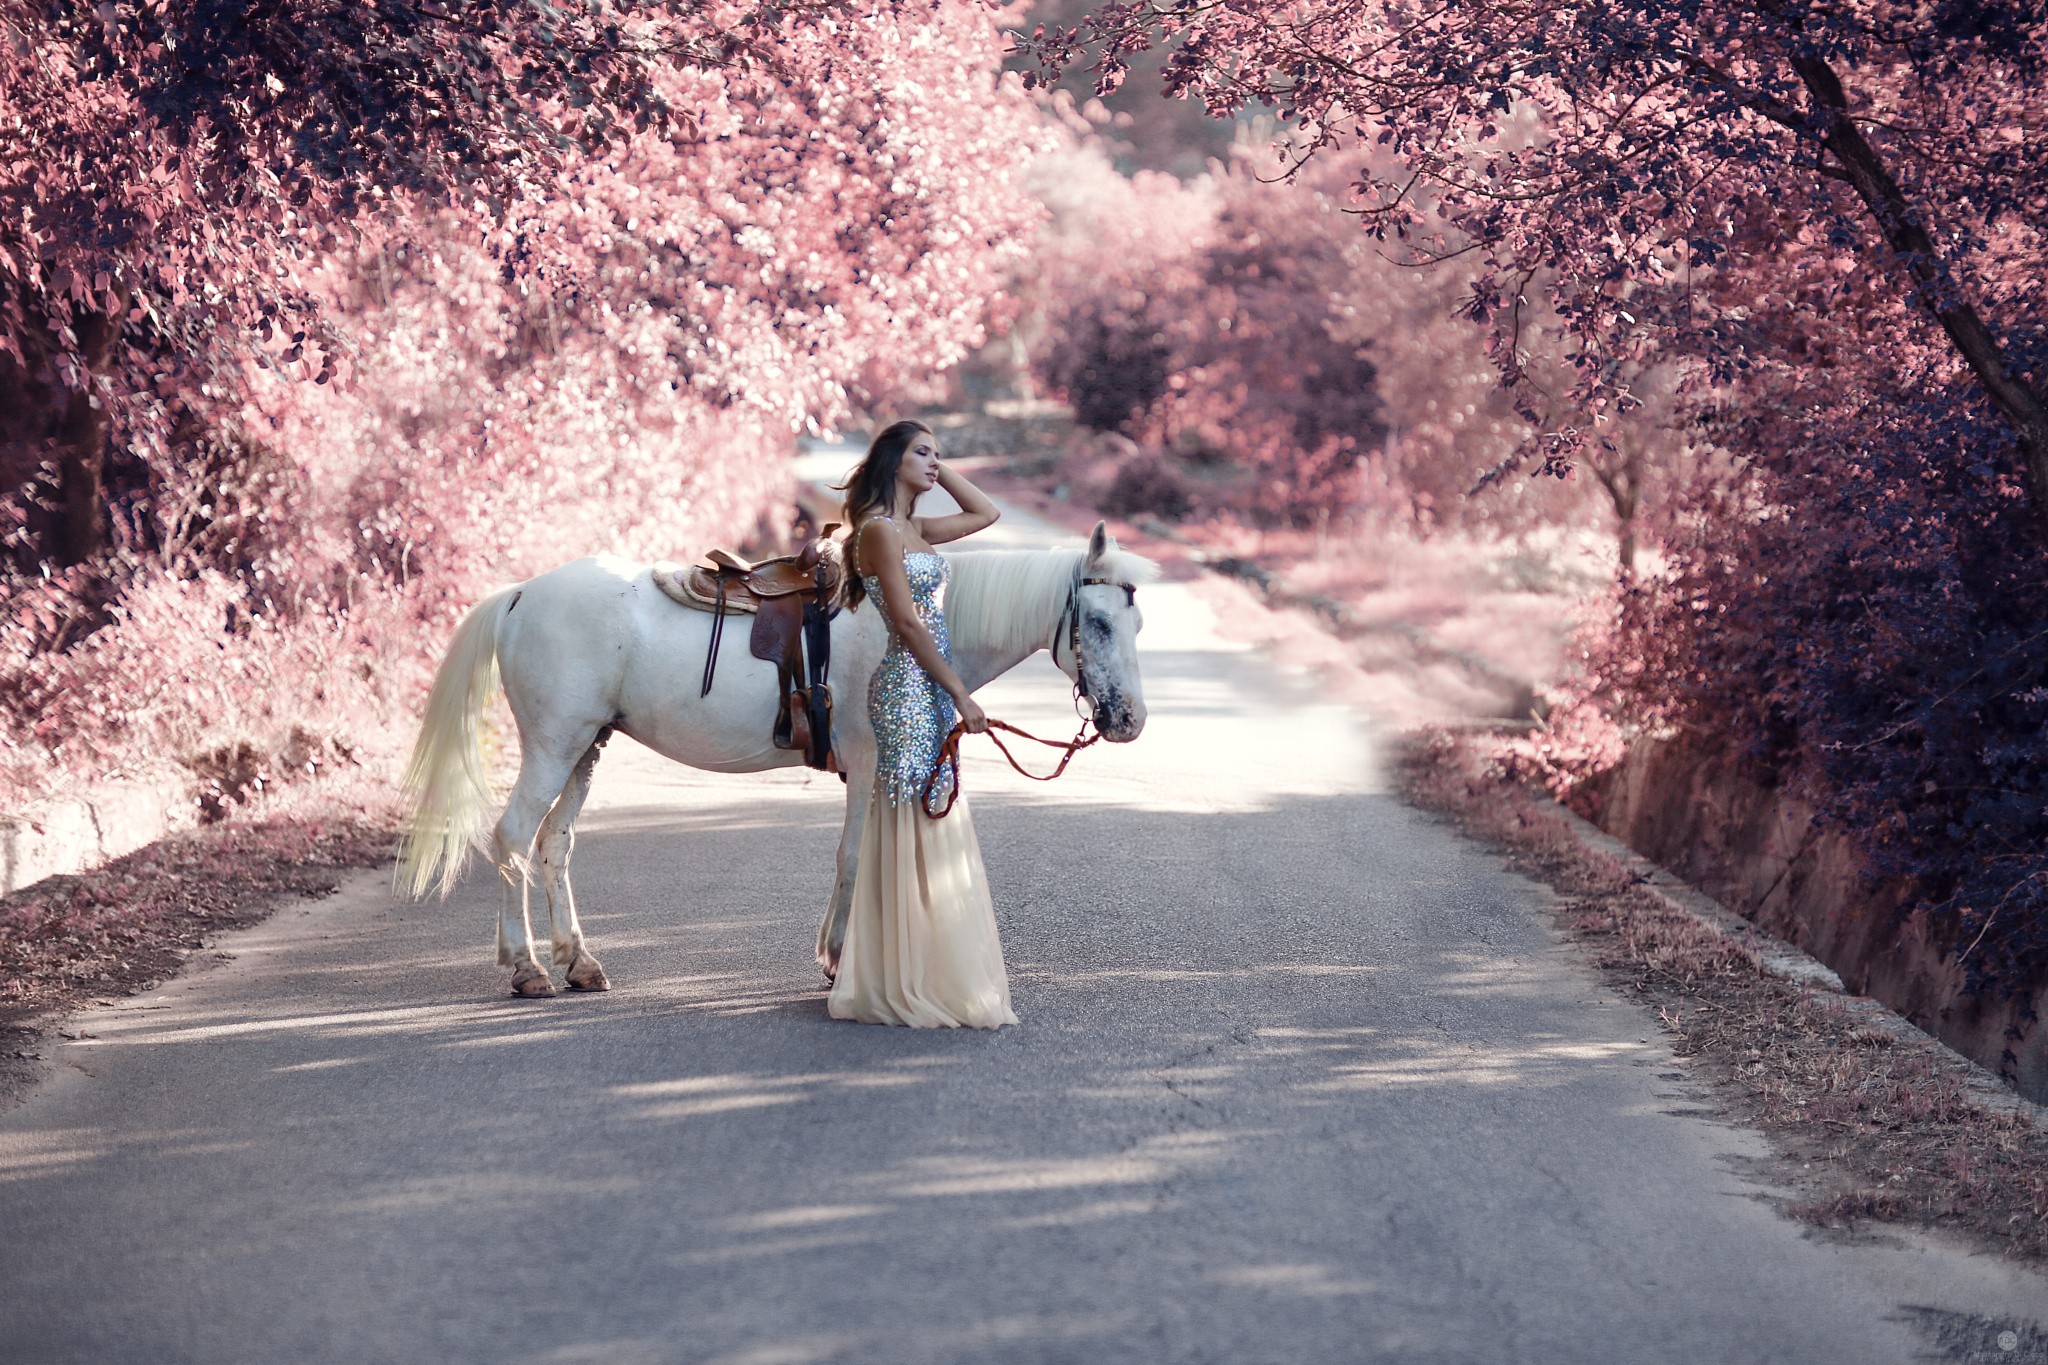 A girl in a dress with a white horse.